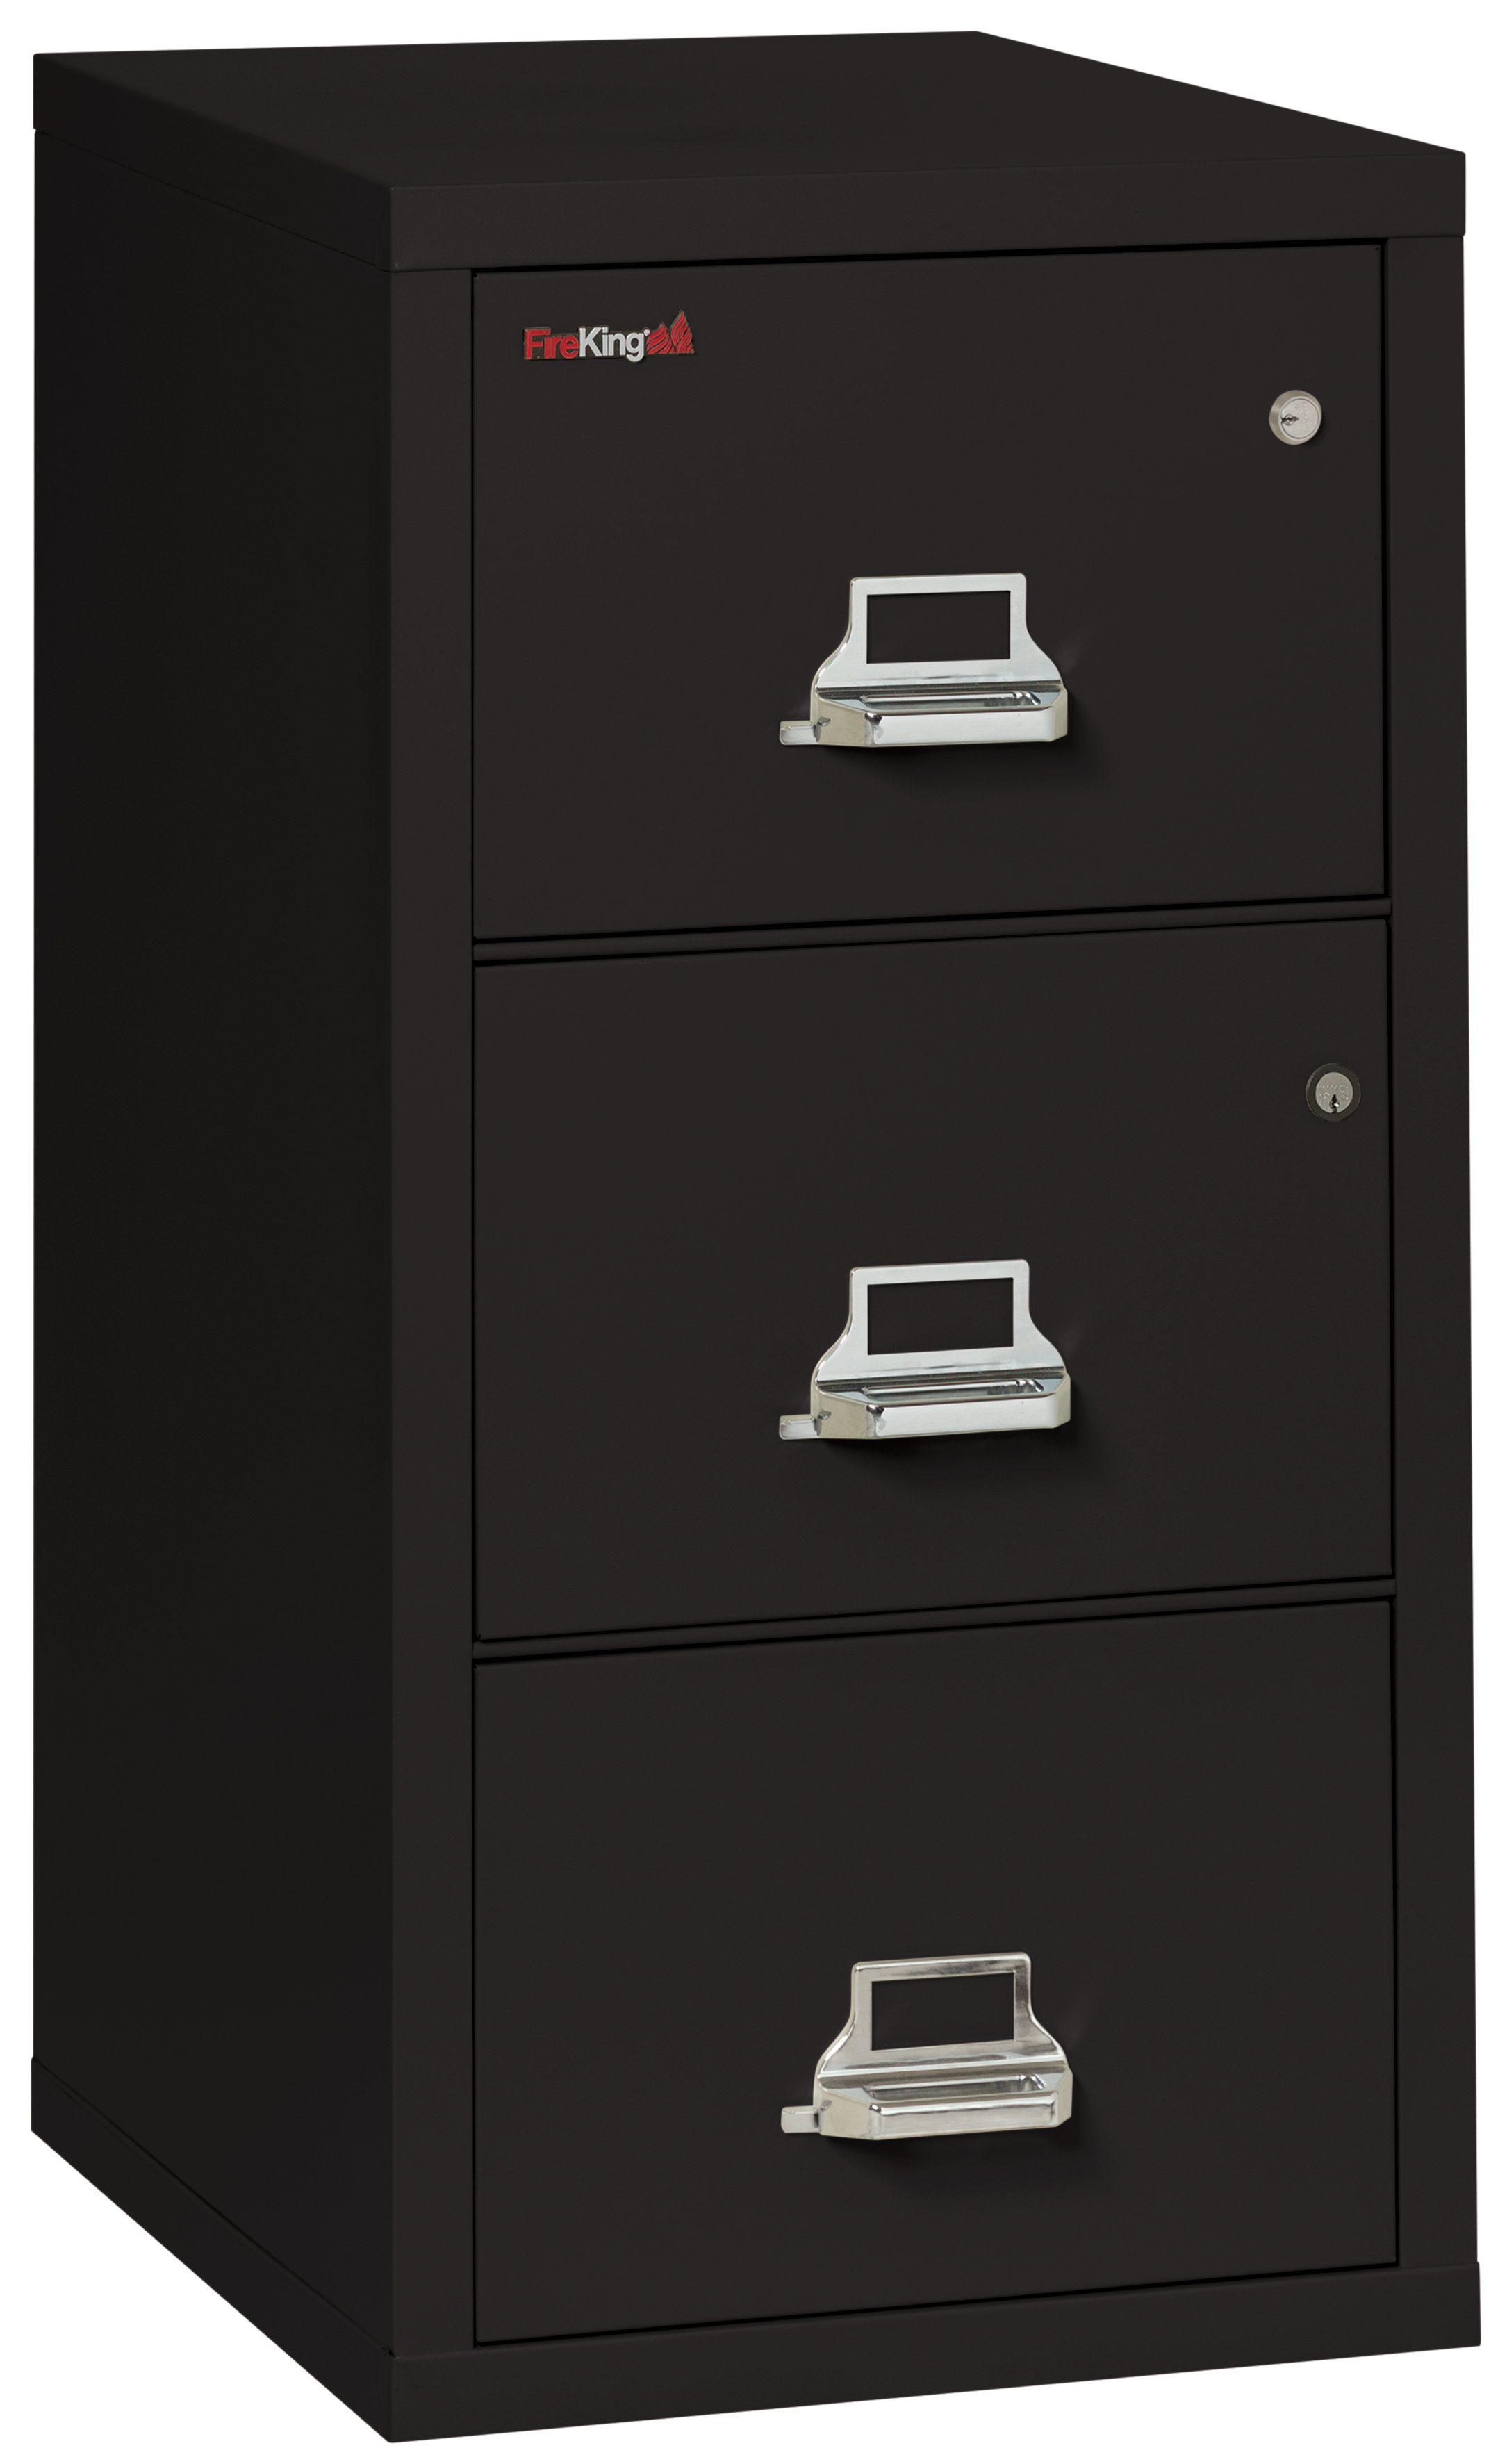 Fireking Legal Safe In A File Fireproof 3 Drawer Vertical File within size 2169 X 3546